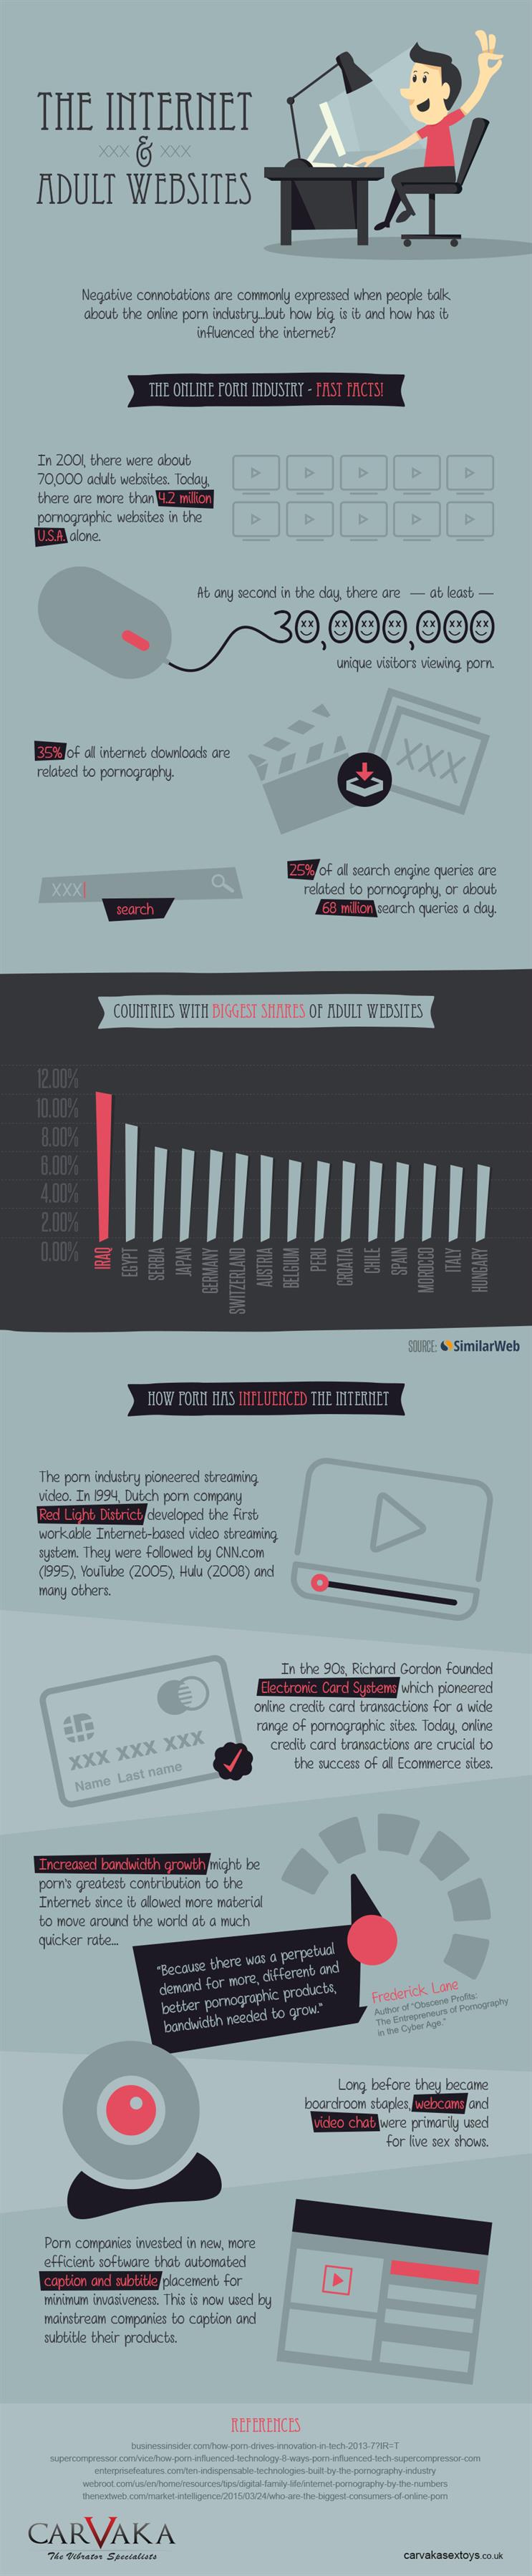 Infographic: Internet porn...is it really that big?